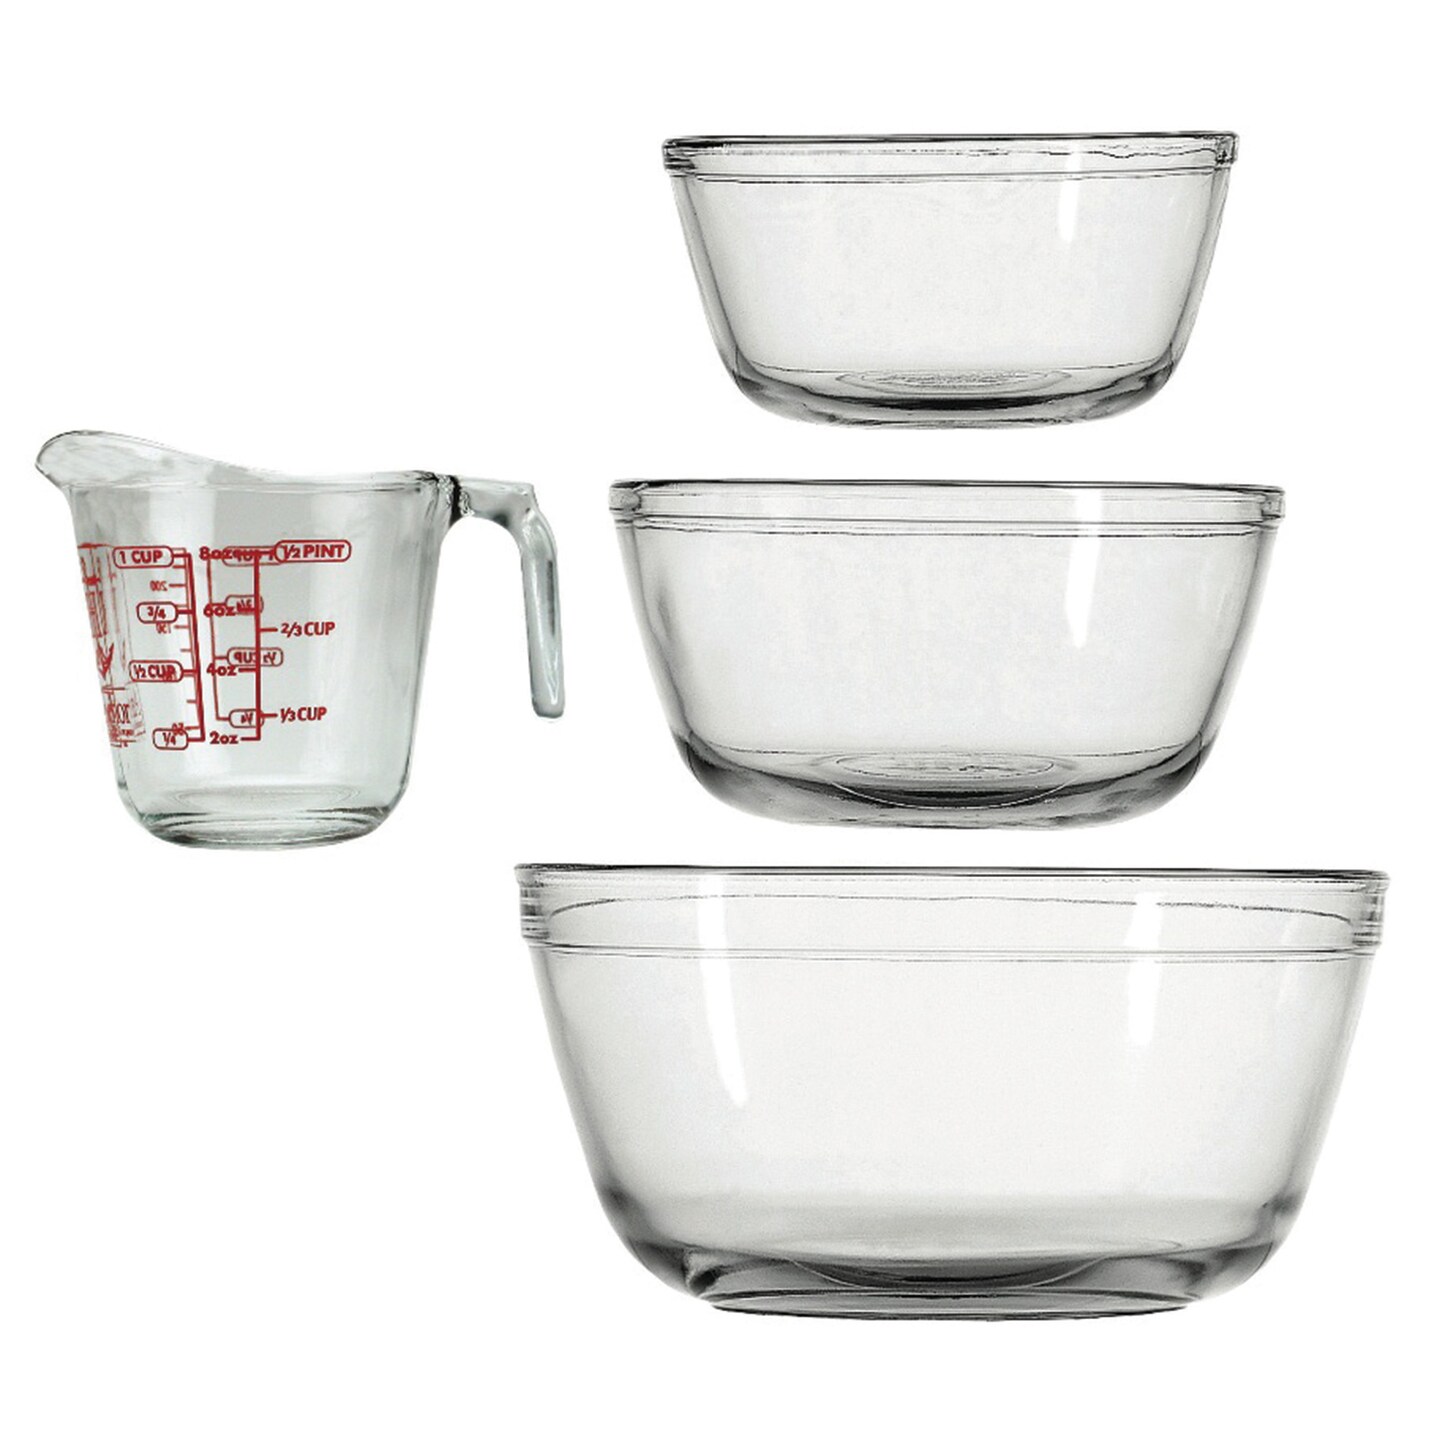 Bowls and Measuring Cup Set of 4-Piece